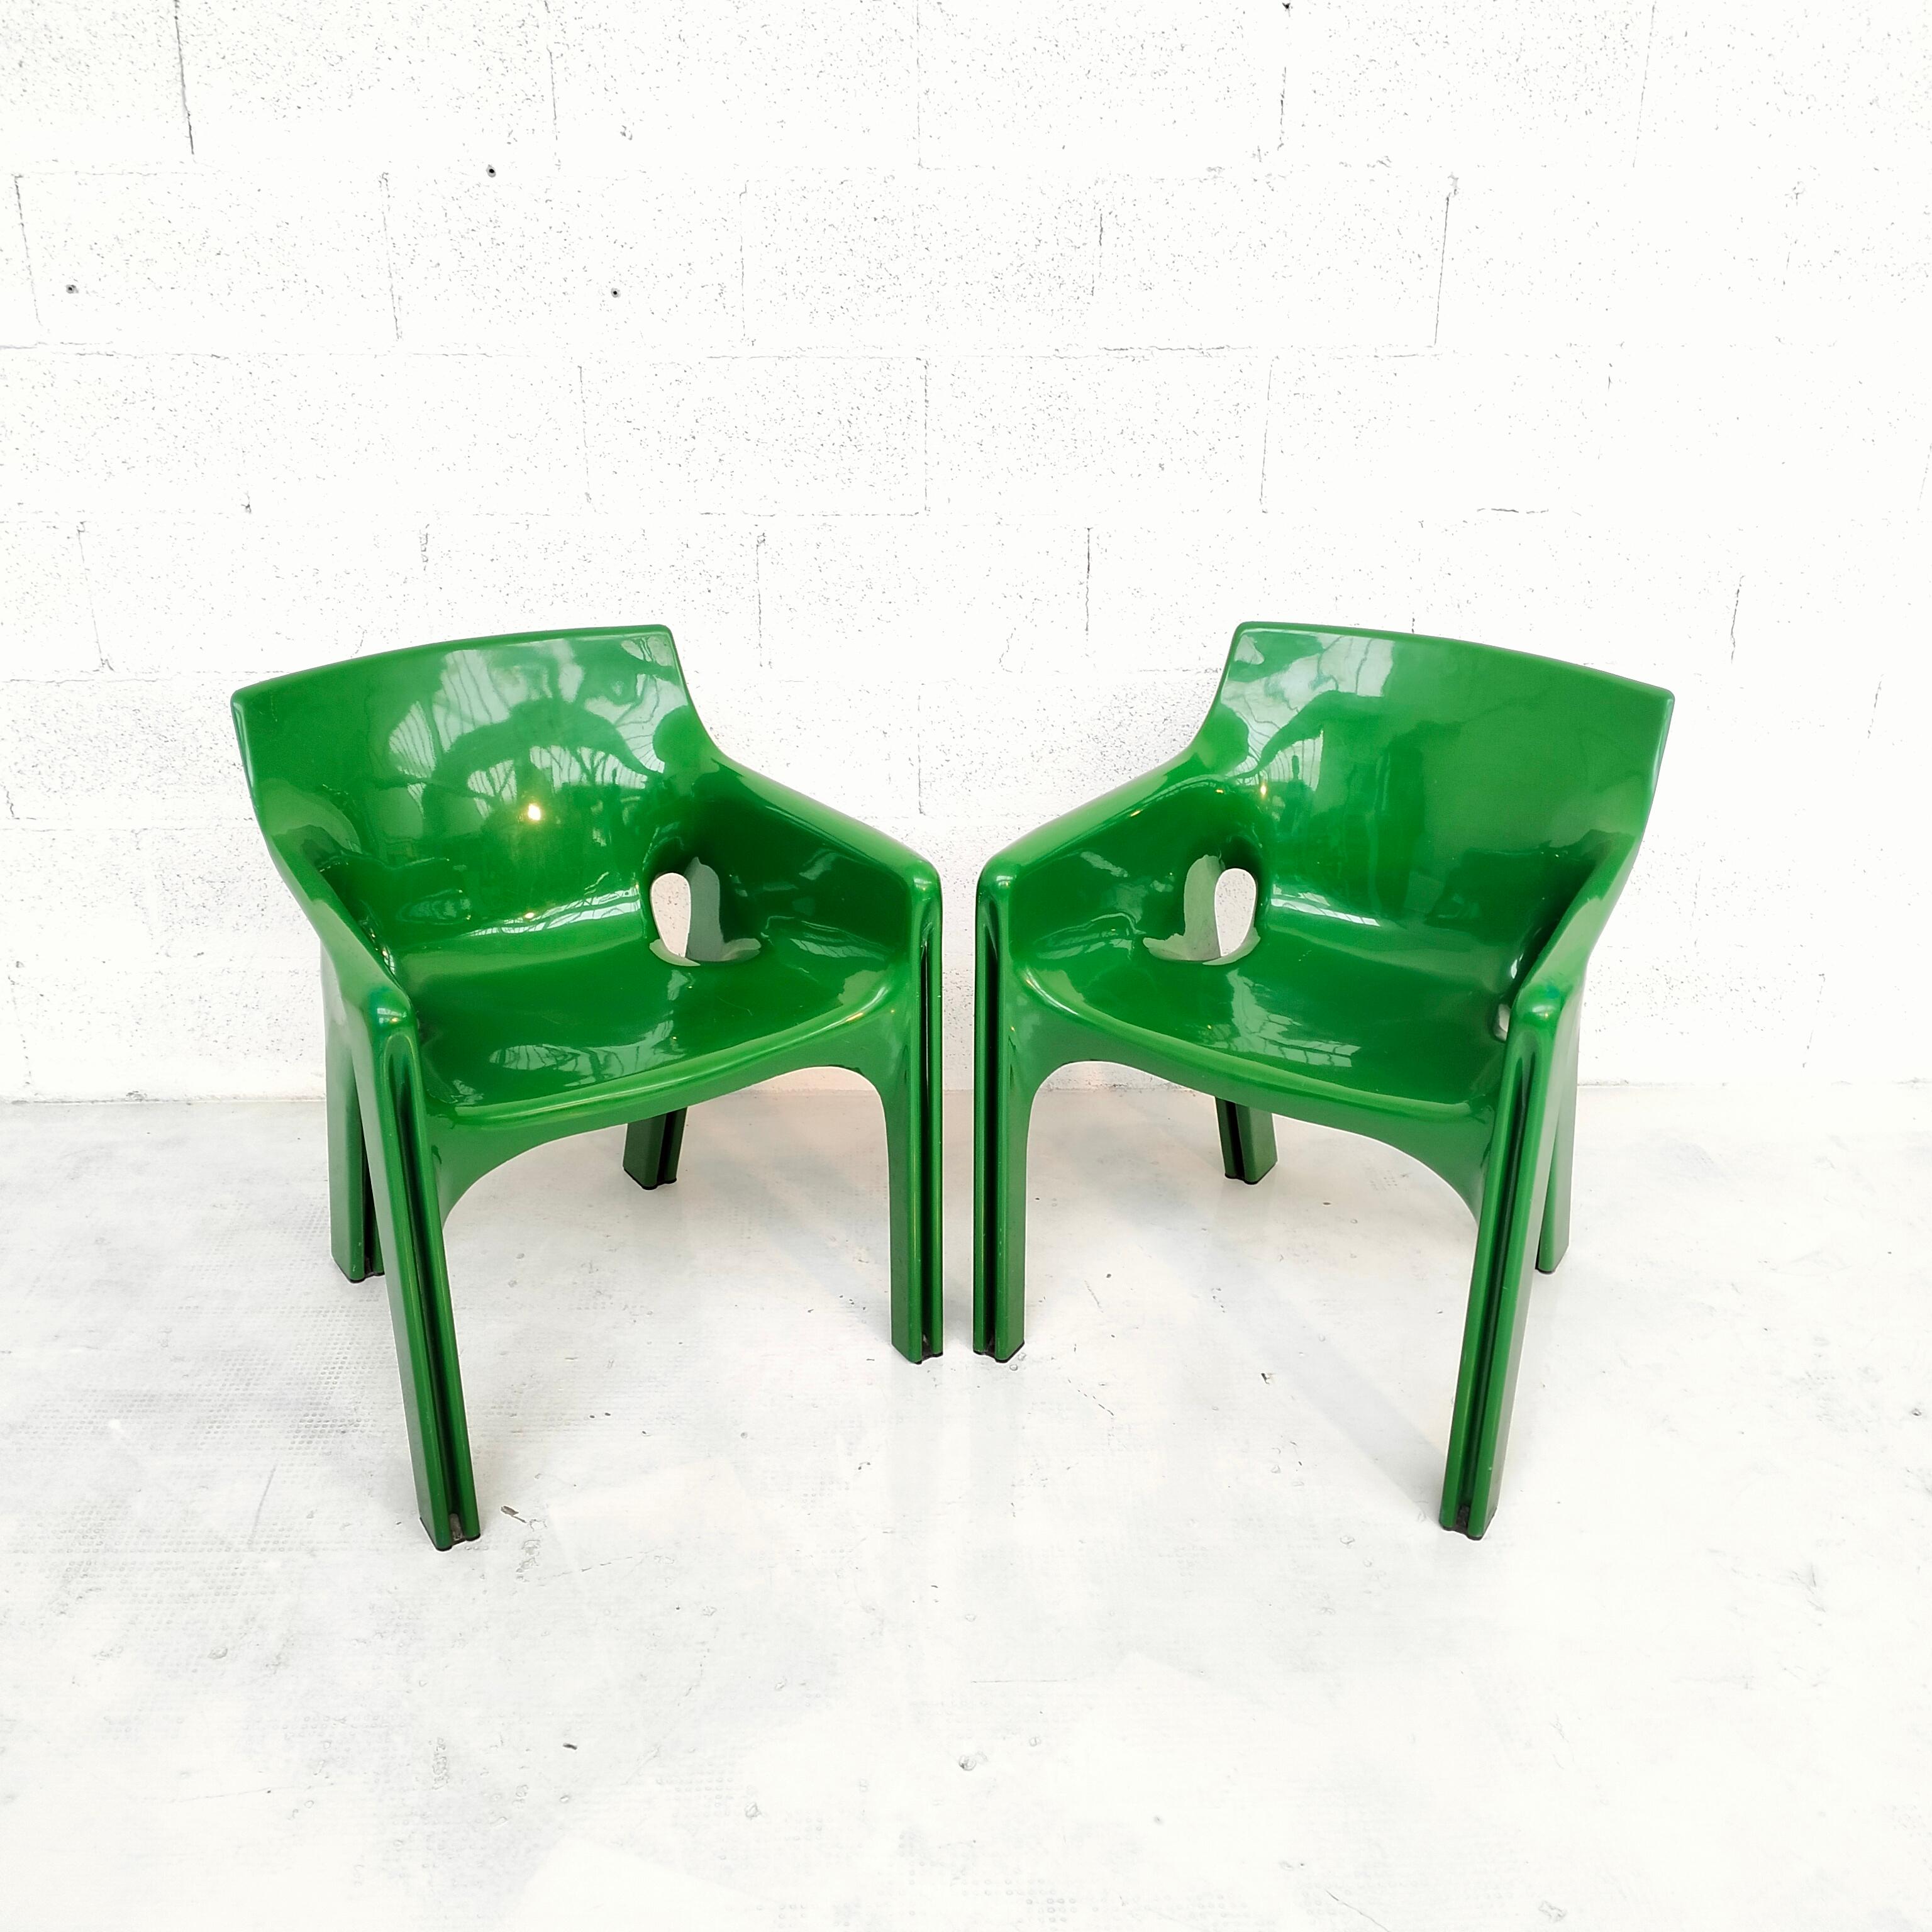 Mid-Century Modern 2 green Gaudì chairs by Vico Magistretti for Artemide 70s